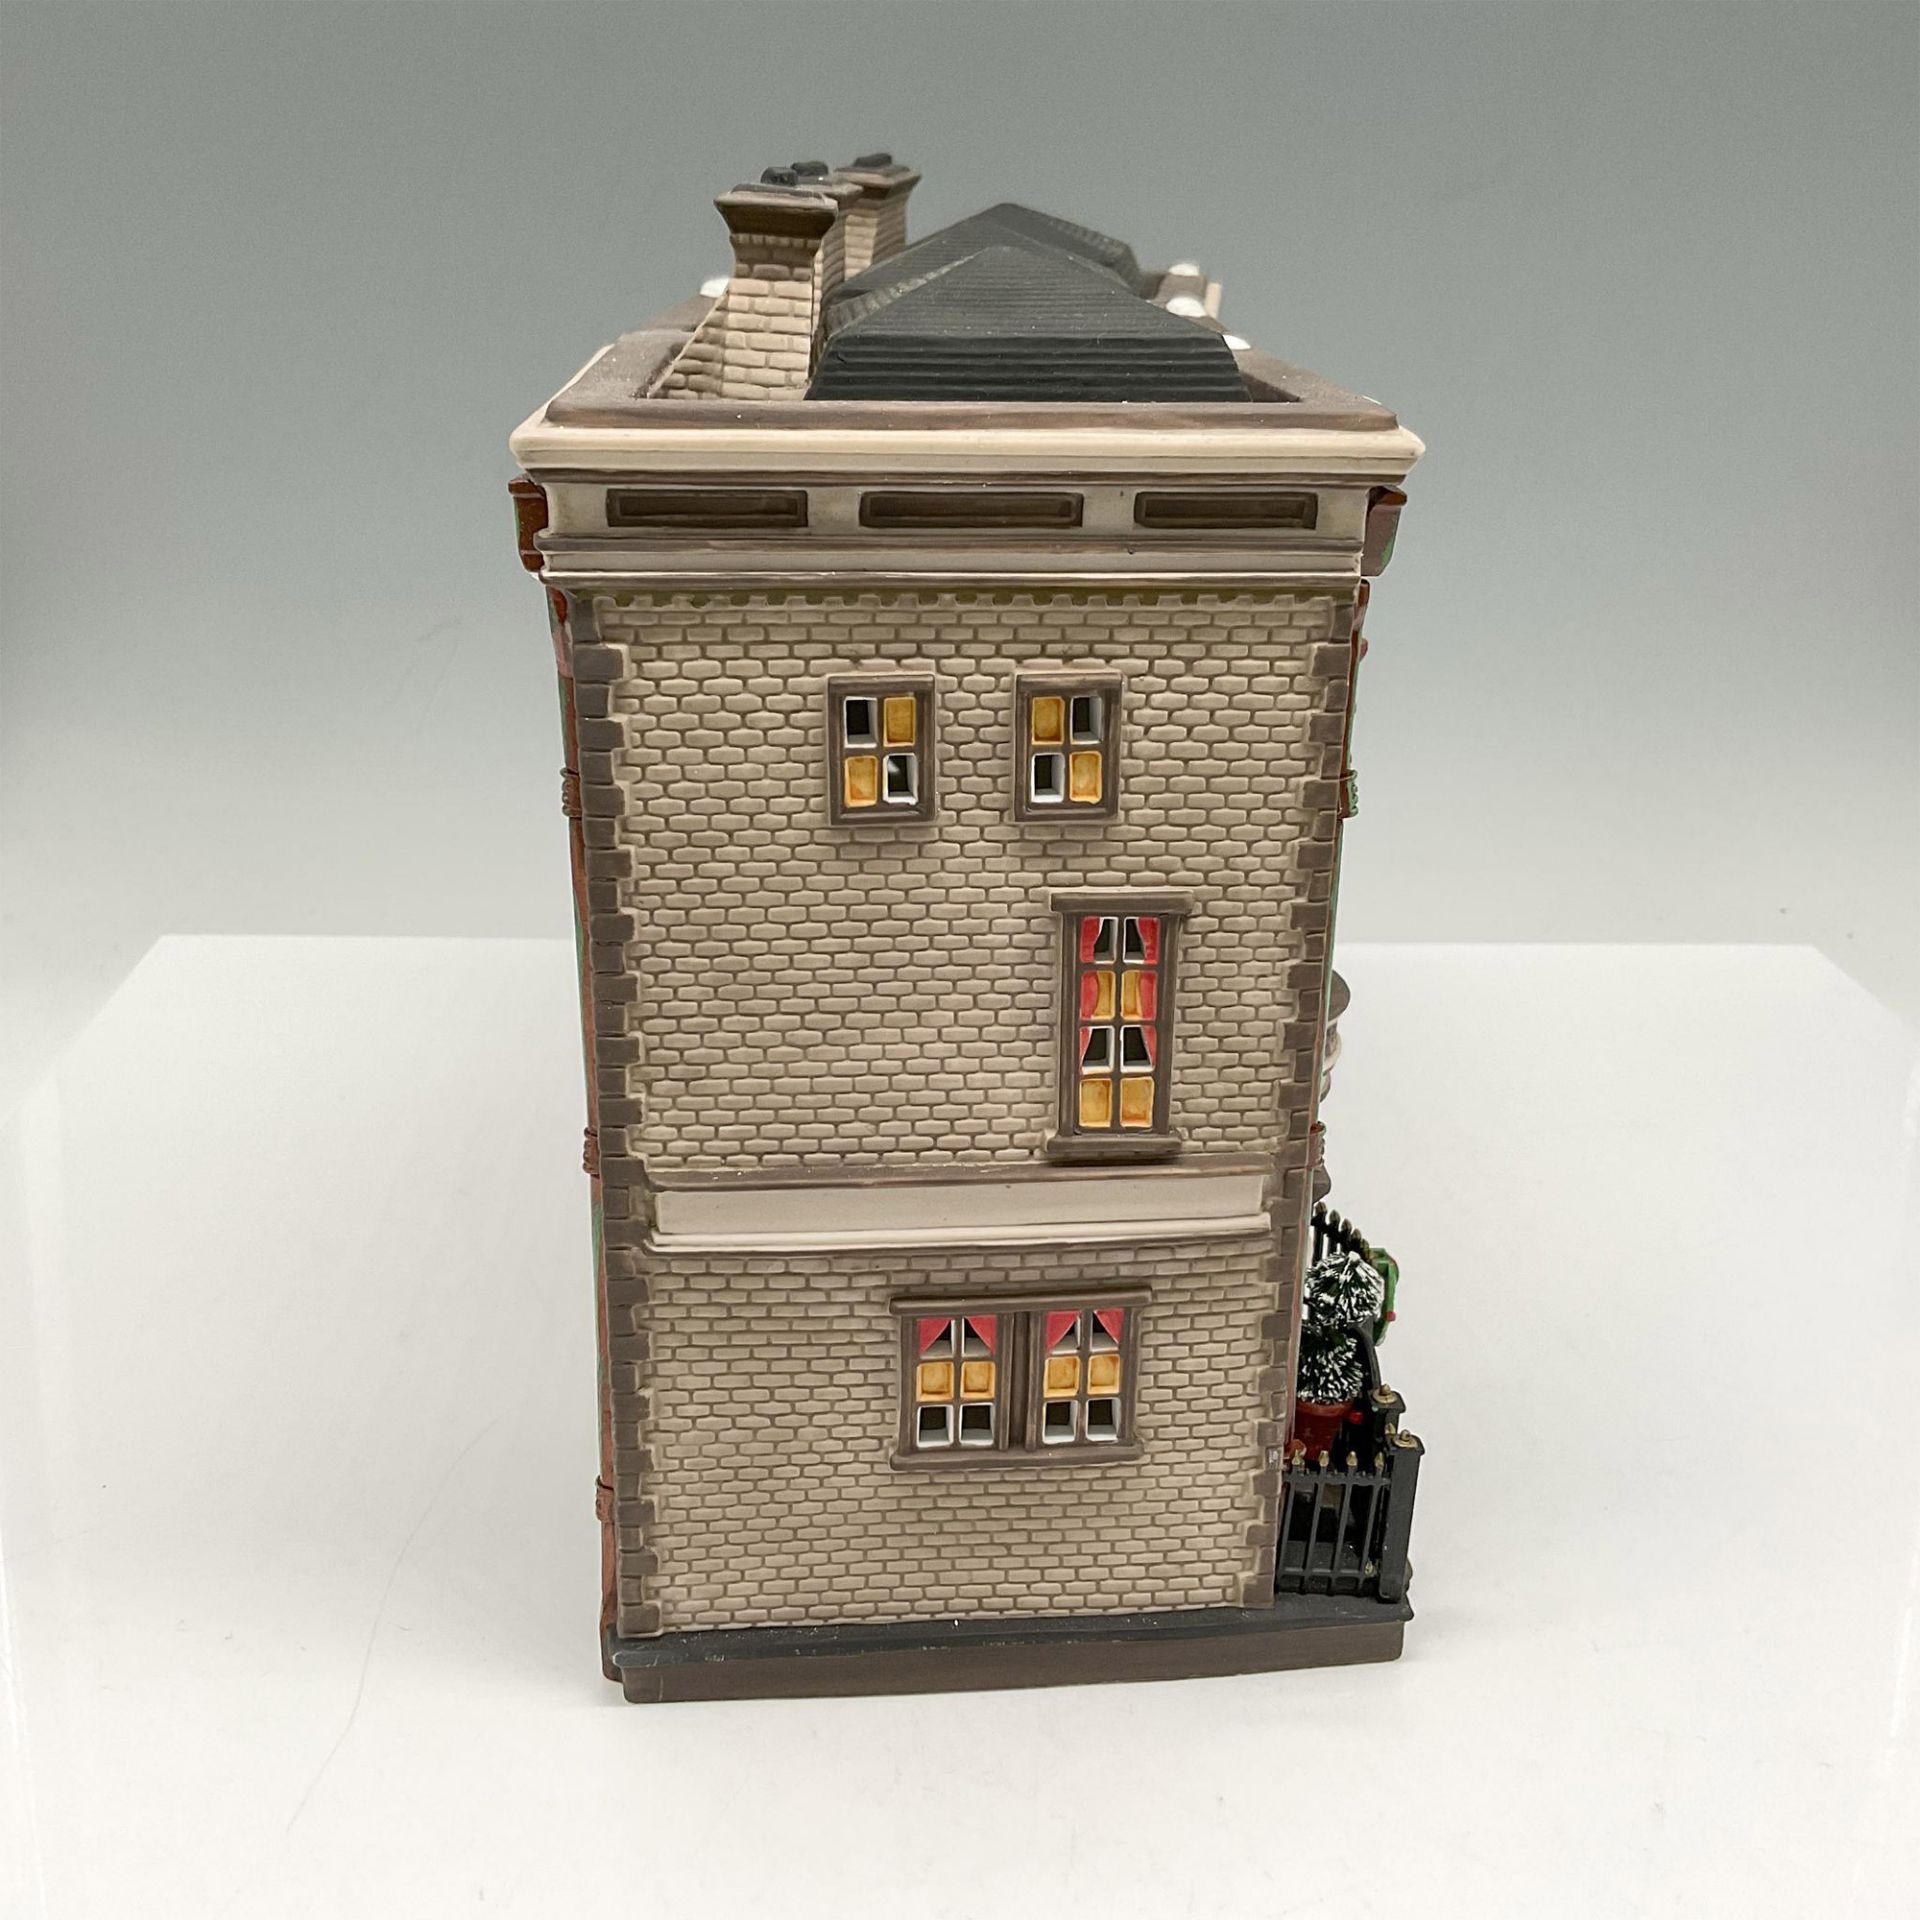 Department 56 Porcelain Dickens' Village Series, Mulberrie Court - Image 2 of 5